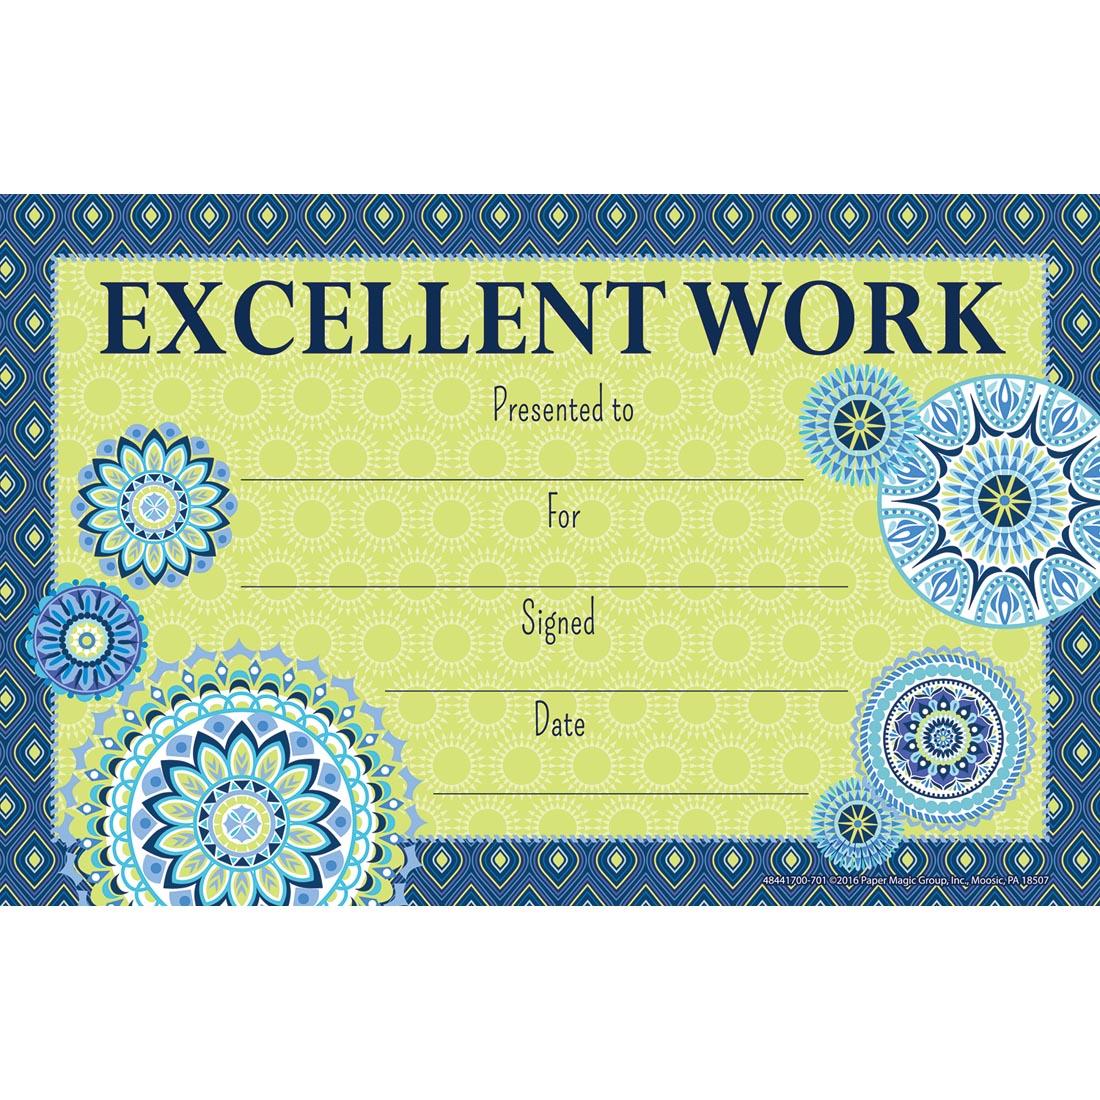 Excellent Work Recognition Award from the Blue Harmony collection by Eureka